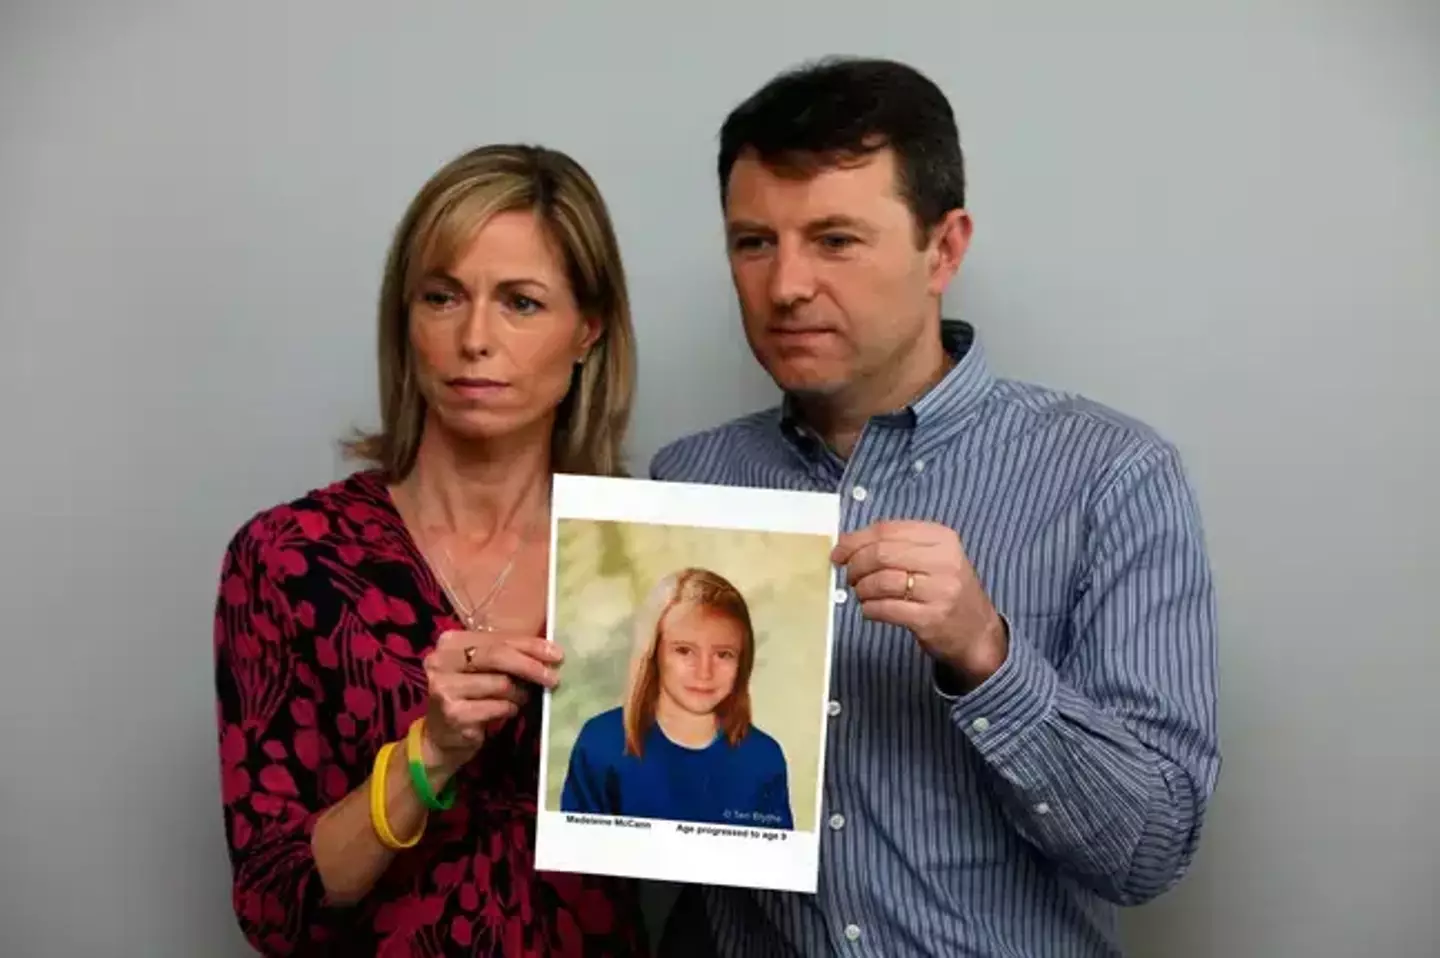 It's been 15 years since Kate and Gerry McCann's daughter went missing.